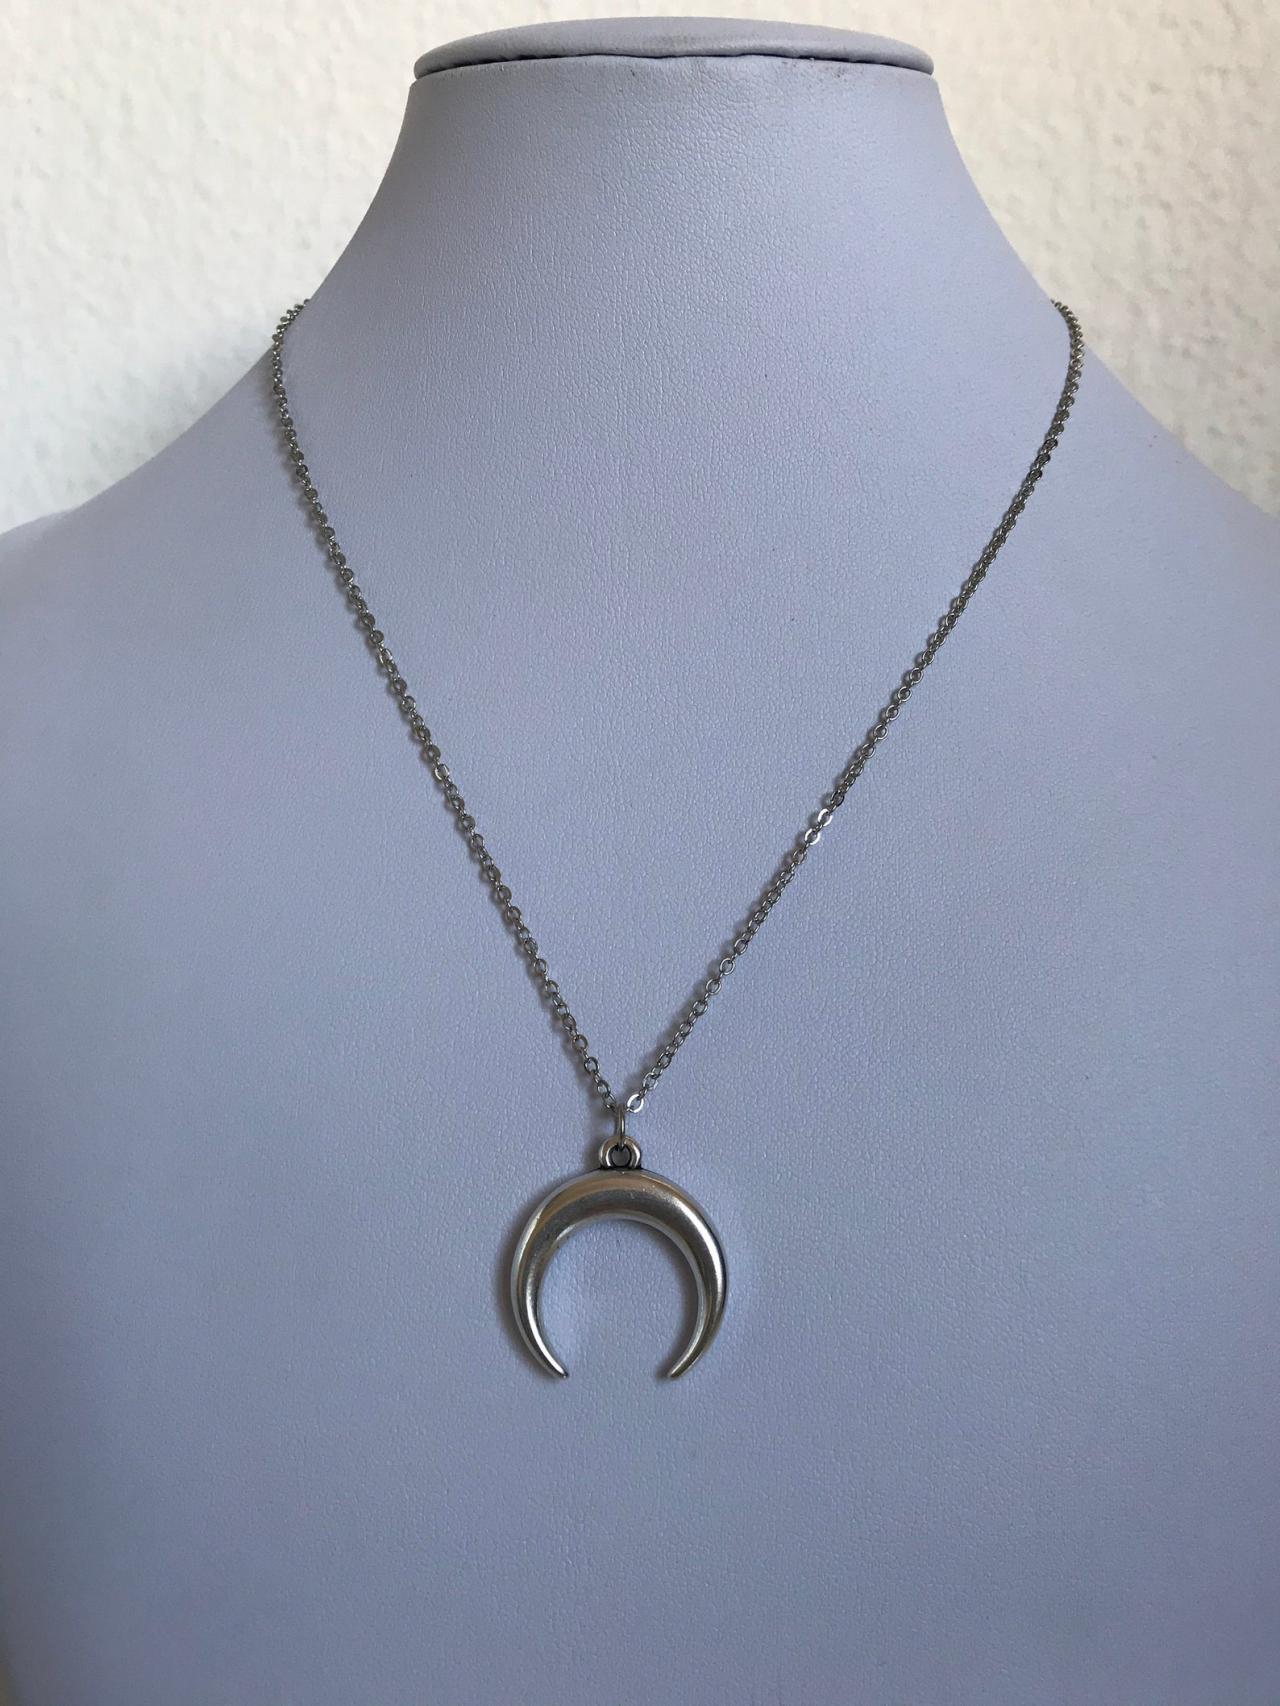 Half Moon Necklace 362- Alloy Silver Moon Necklace Bohemian Alloy Silver Chain Boho Chic Jewelry Necklace Gift Universe Charm